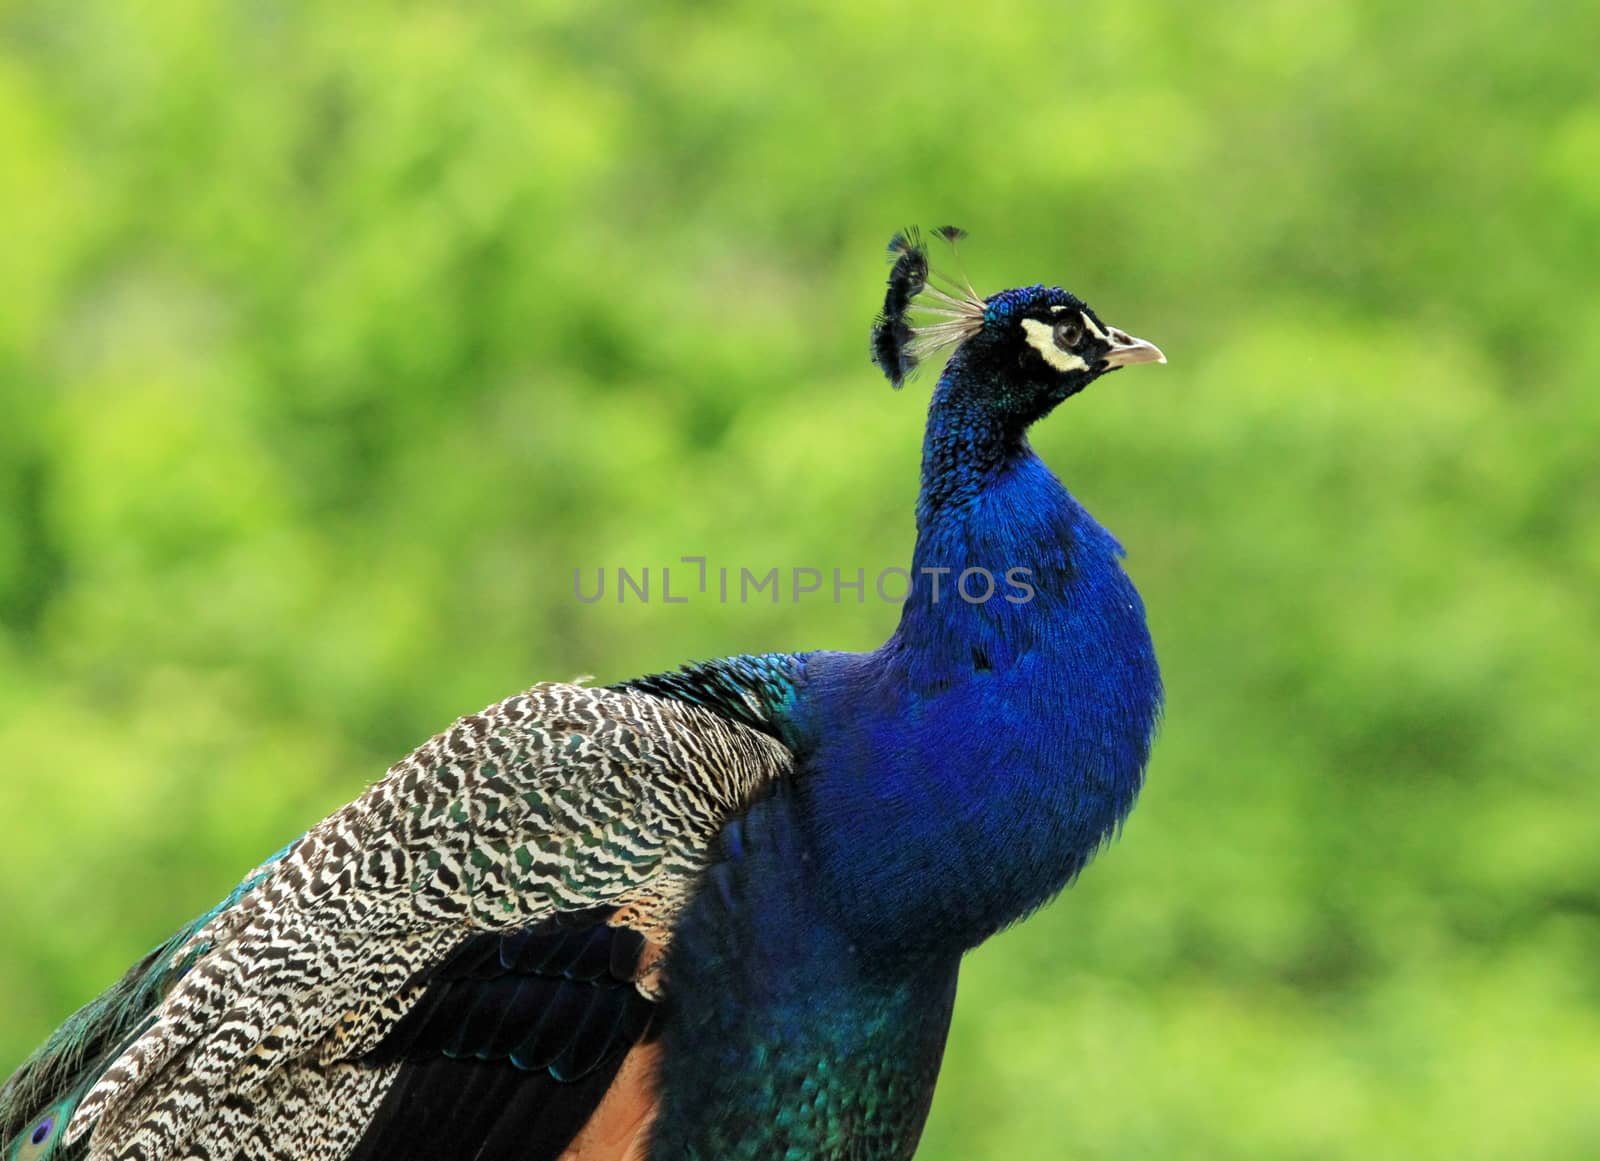 Bright colorful peacock in green background